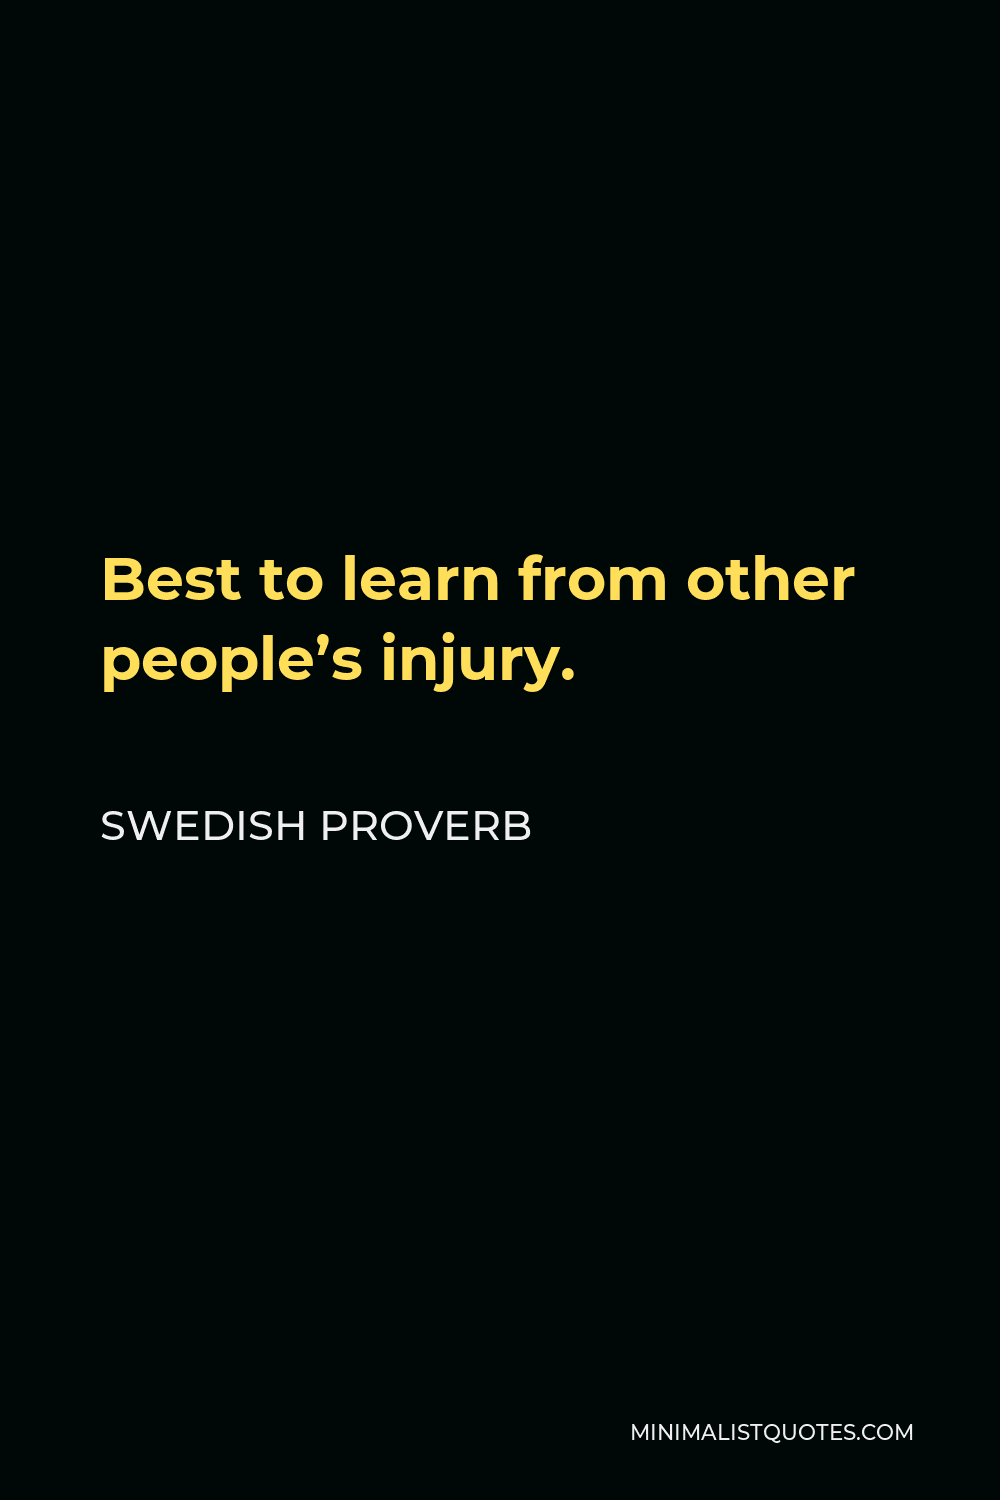 Swedish Proverb Quote - Best to learn from other people’s injury.